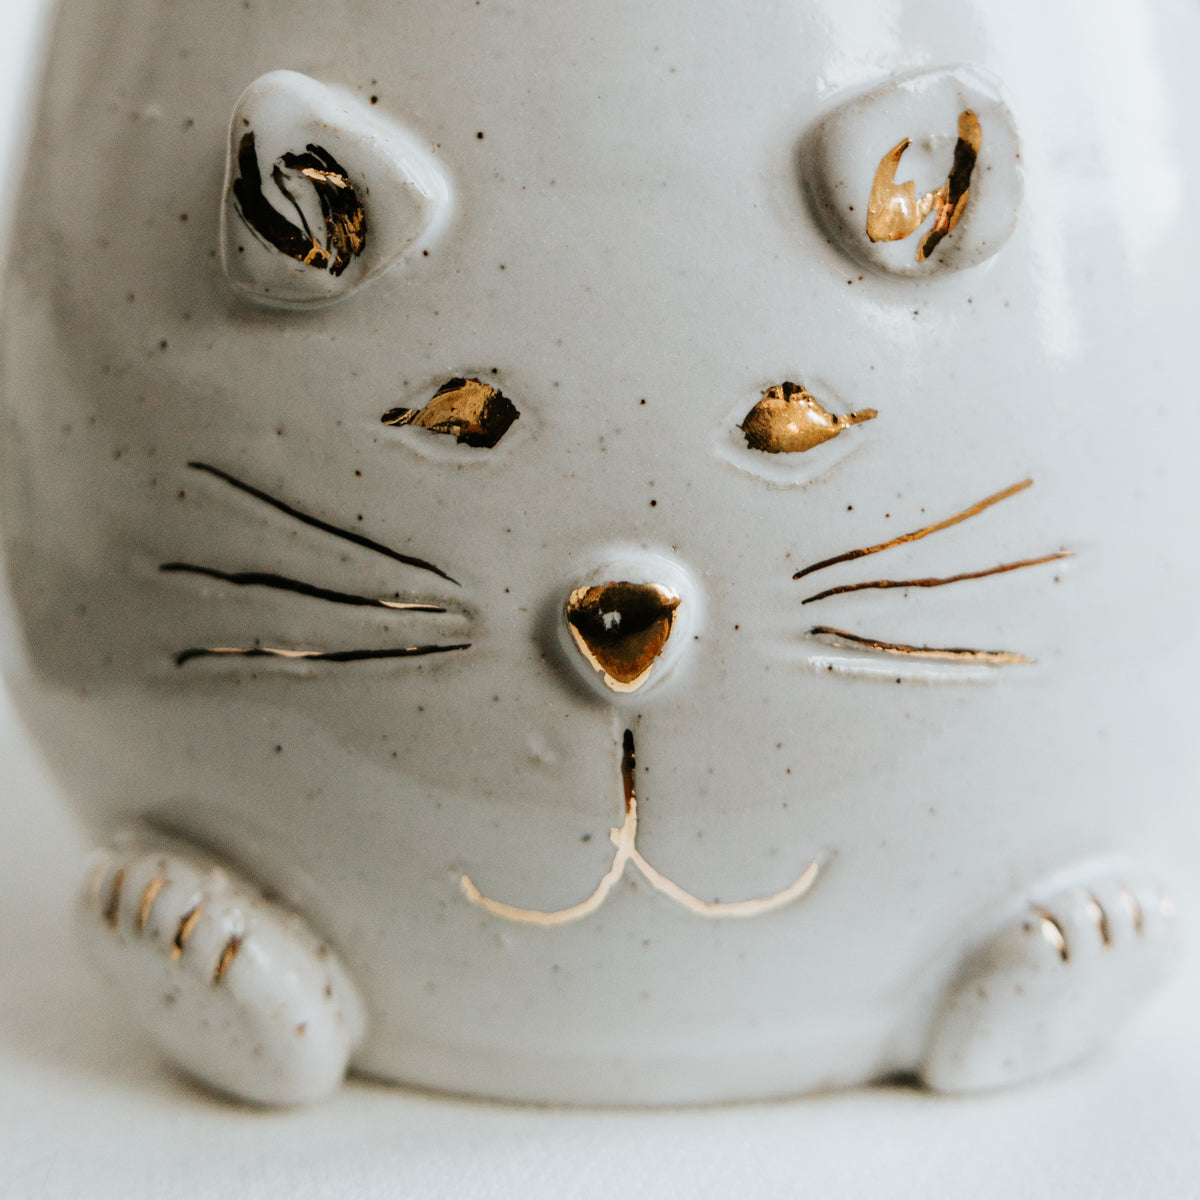 White Meow Cat Pottery Mug with Cochlear Implant